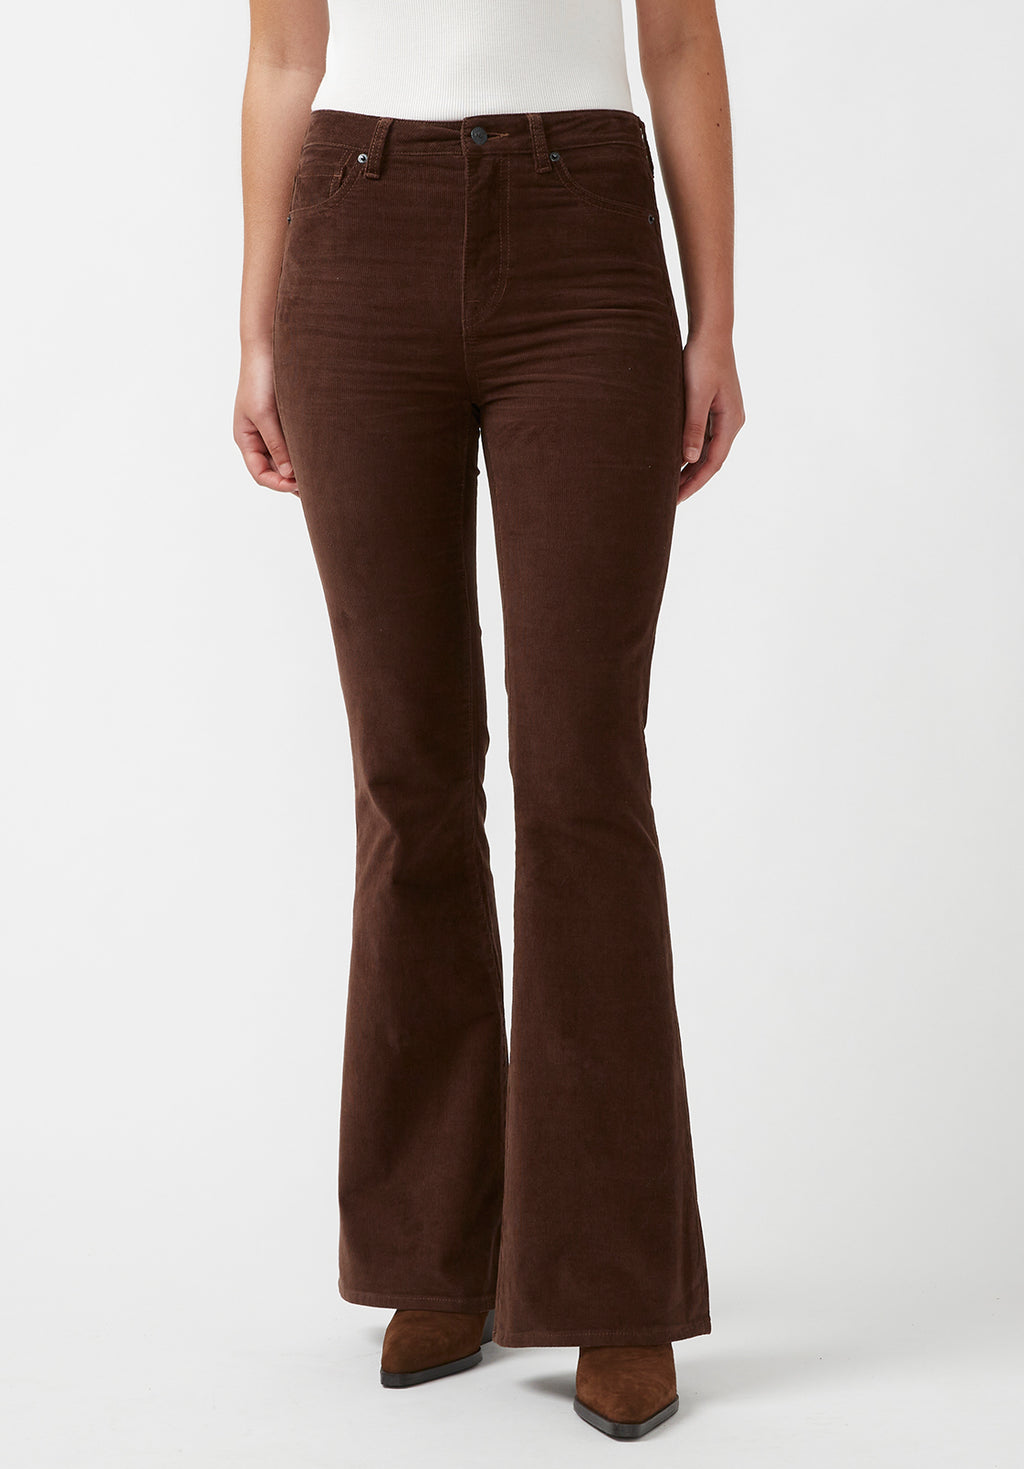 it's all FLARE #corduroy #flare #pants It's easy to combine